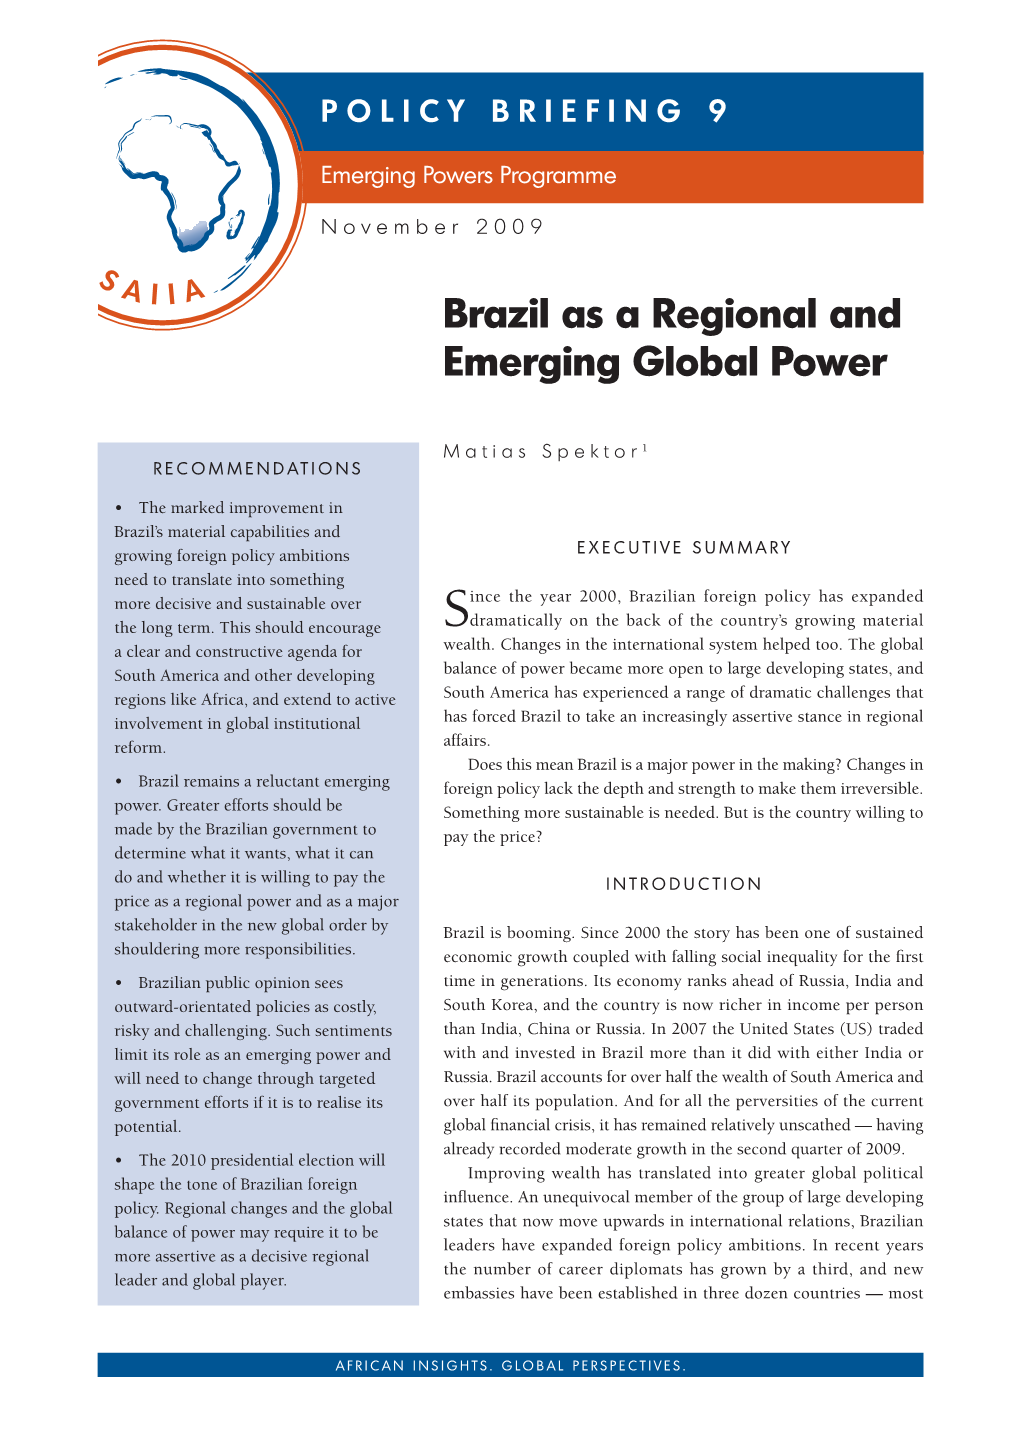 Brazil As a Regional and Emerging Global Power